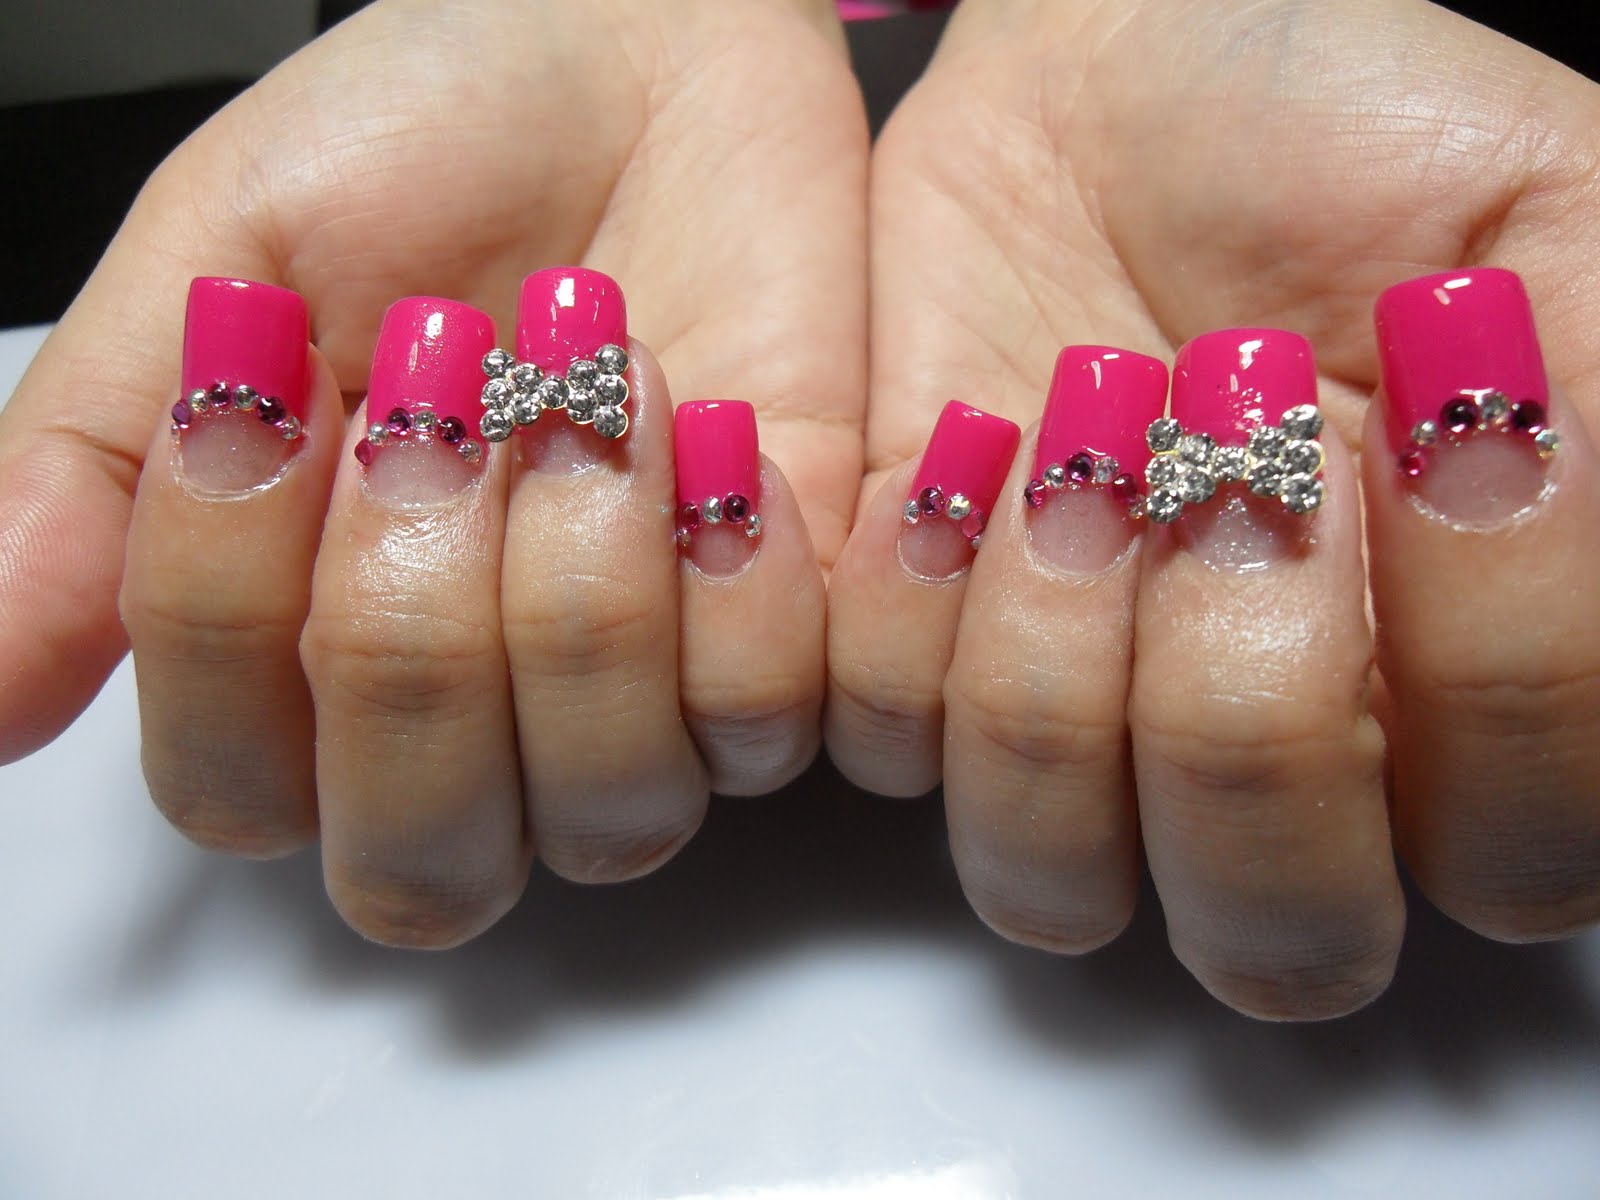 2. "Easy 3D Acrylic Nail Art Designs" - wide 2